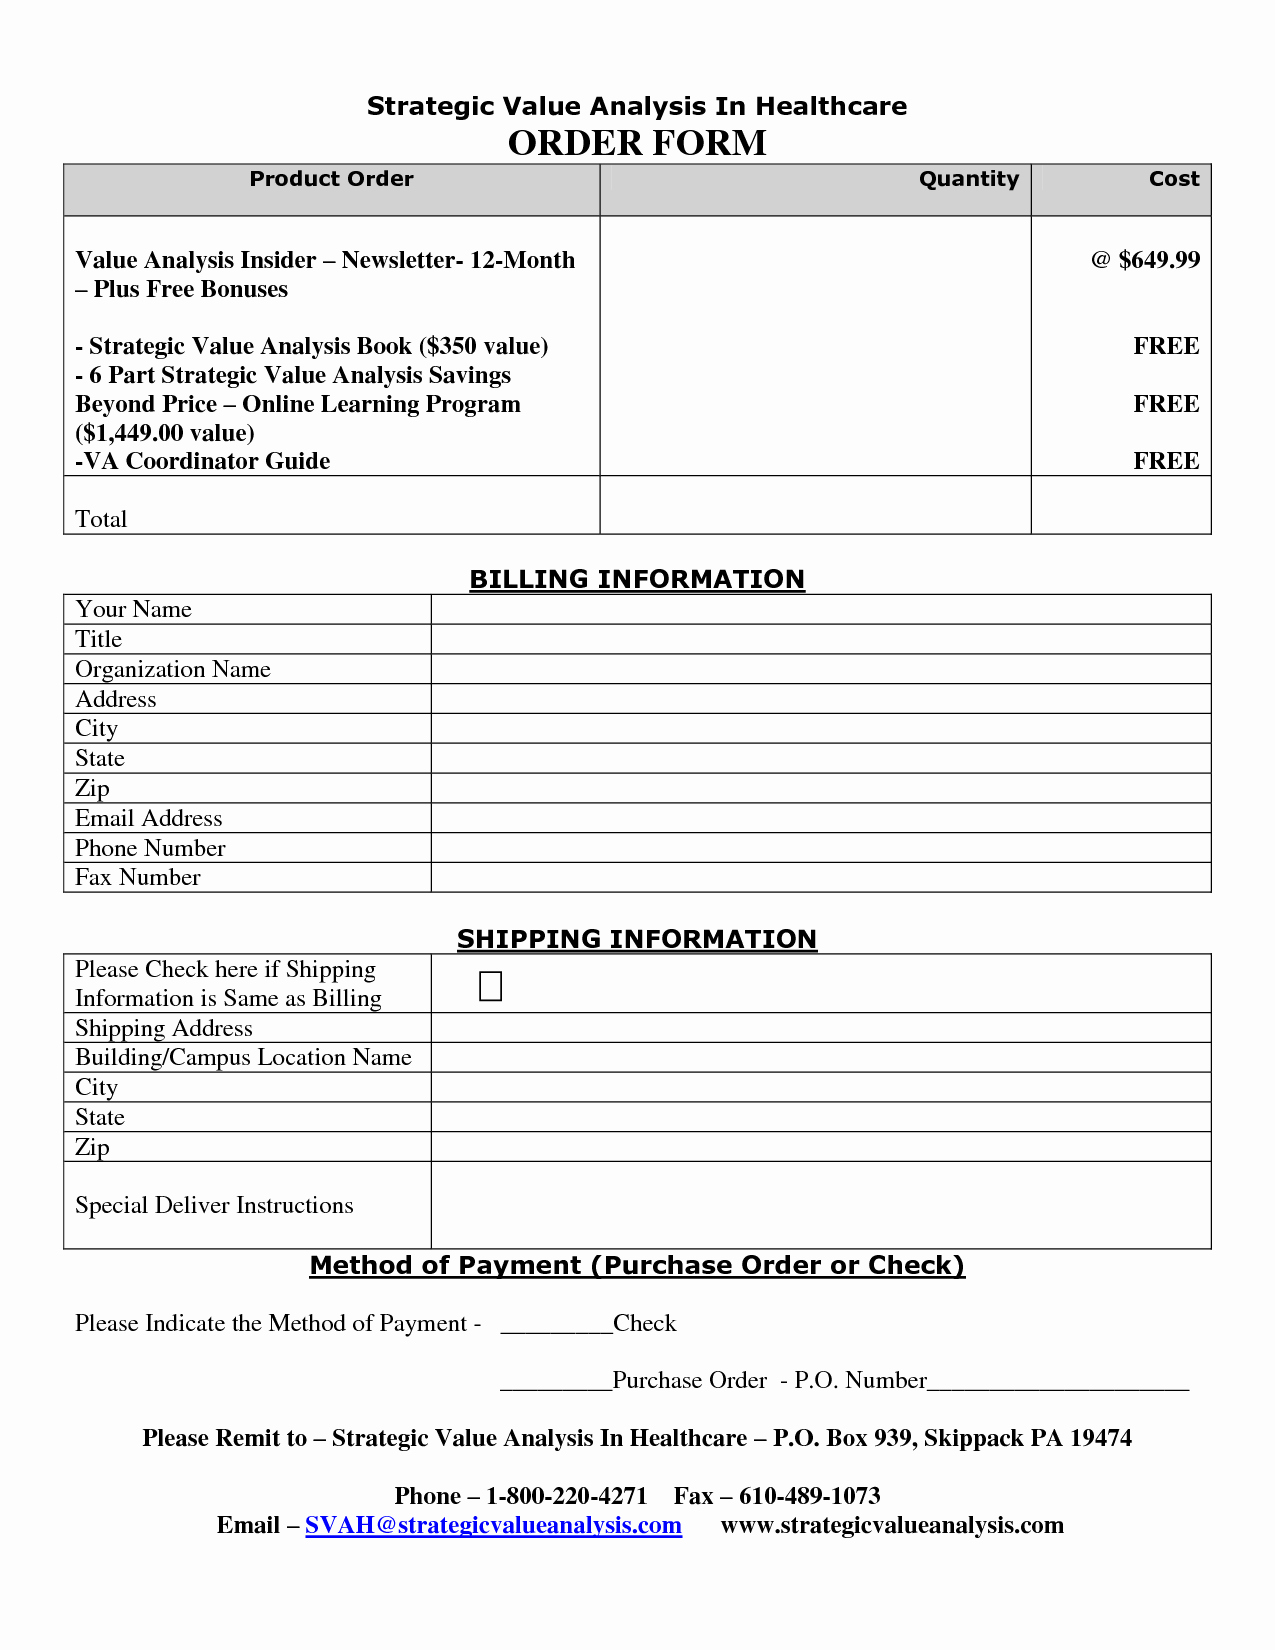 Free Scope Of Work Template Lovely Scope Of Work Template order form